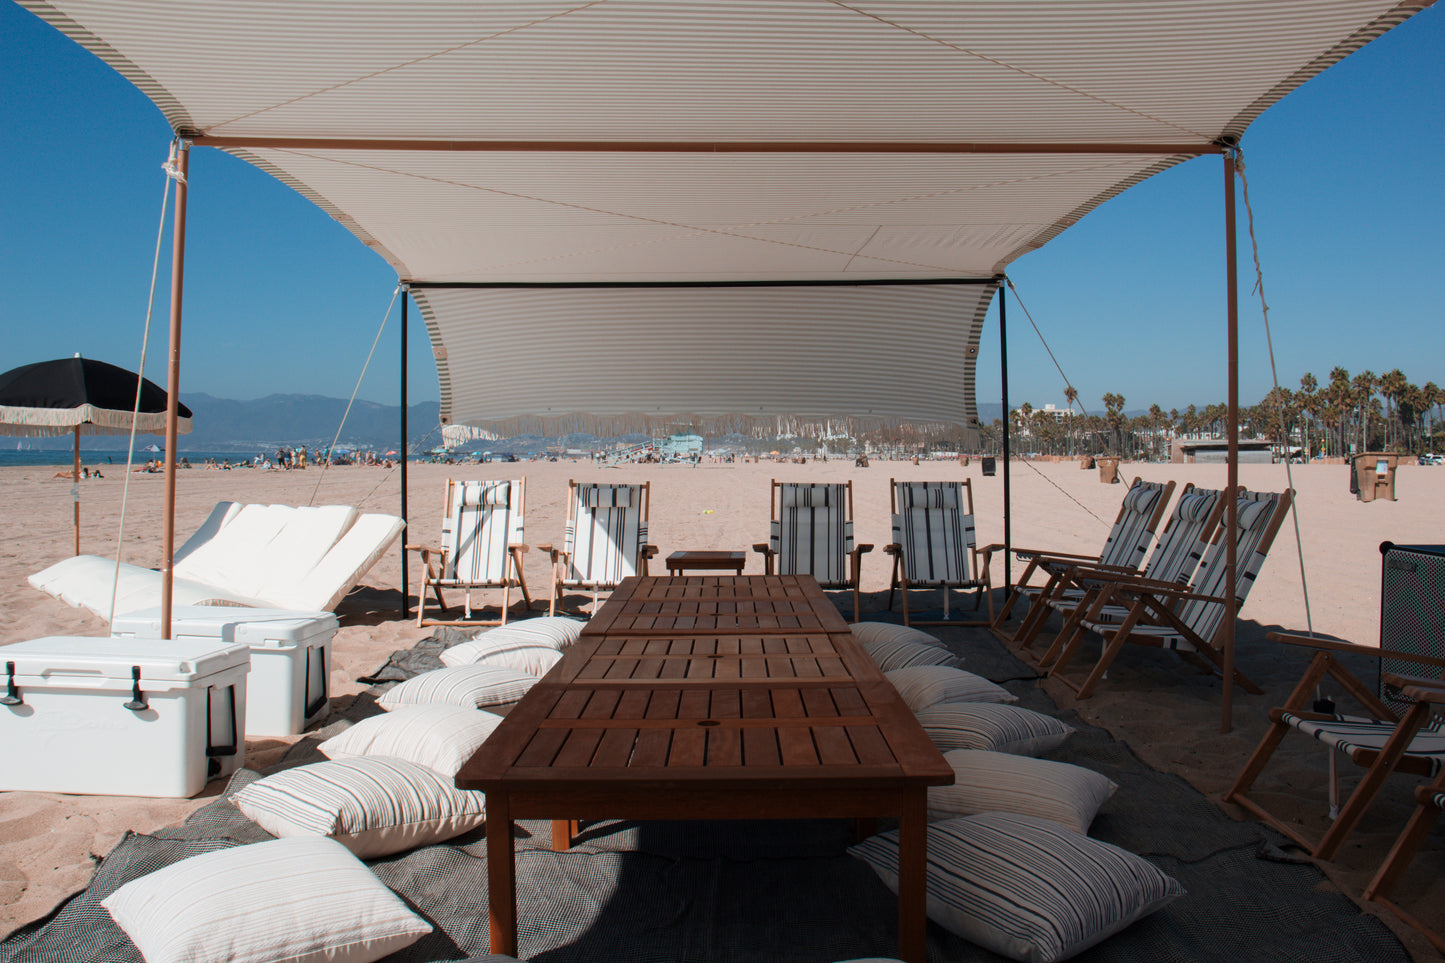 Large beach cabana rental for beach events and backyard events